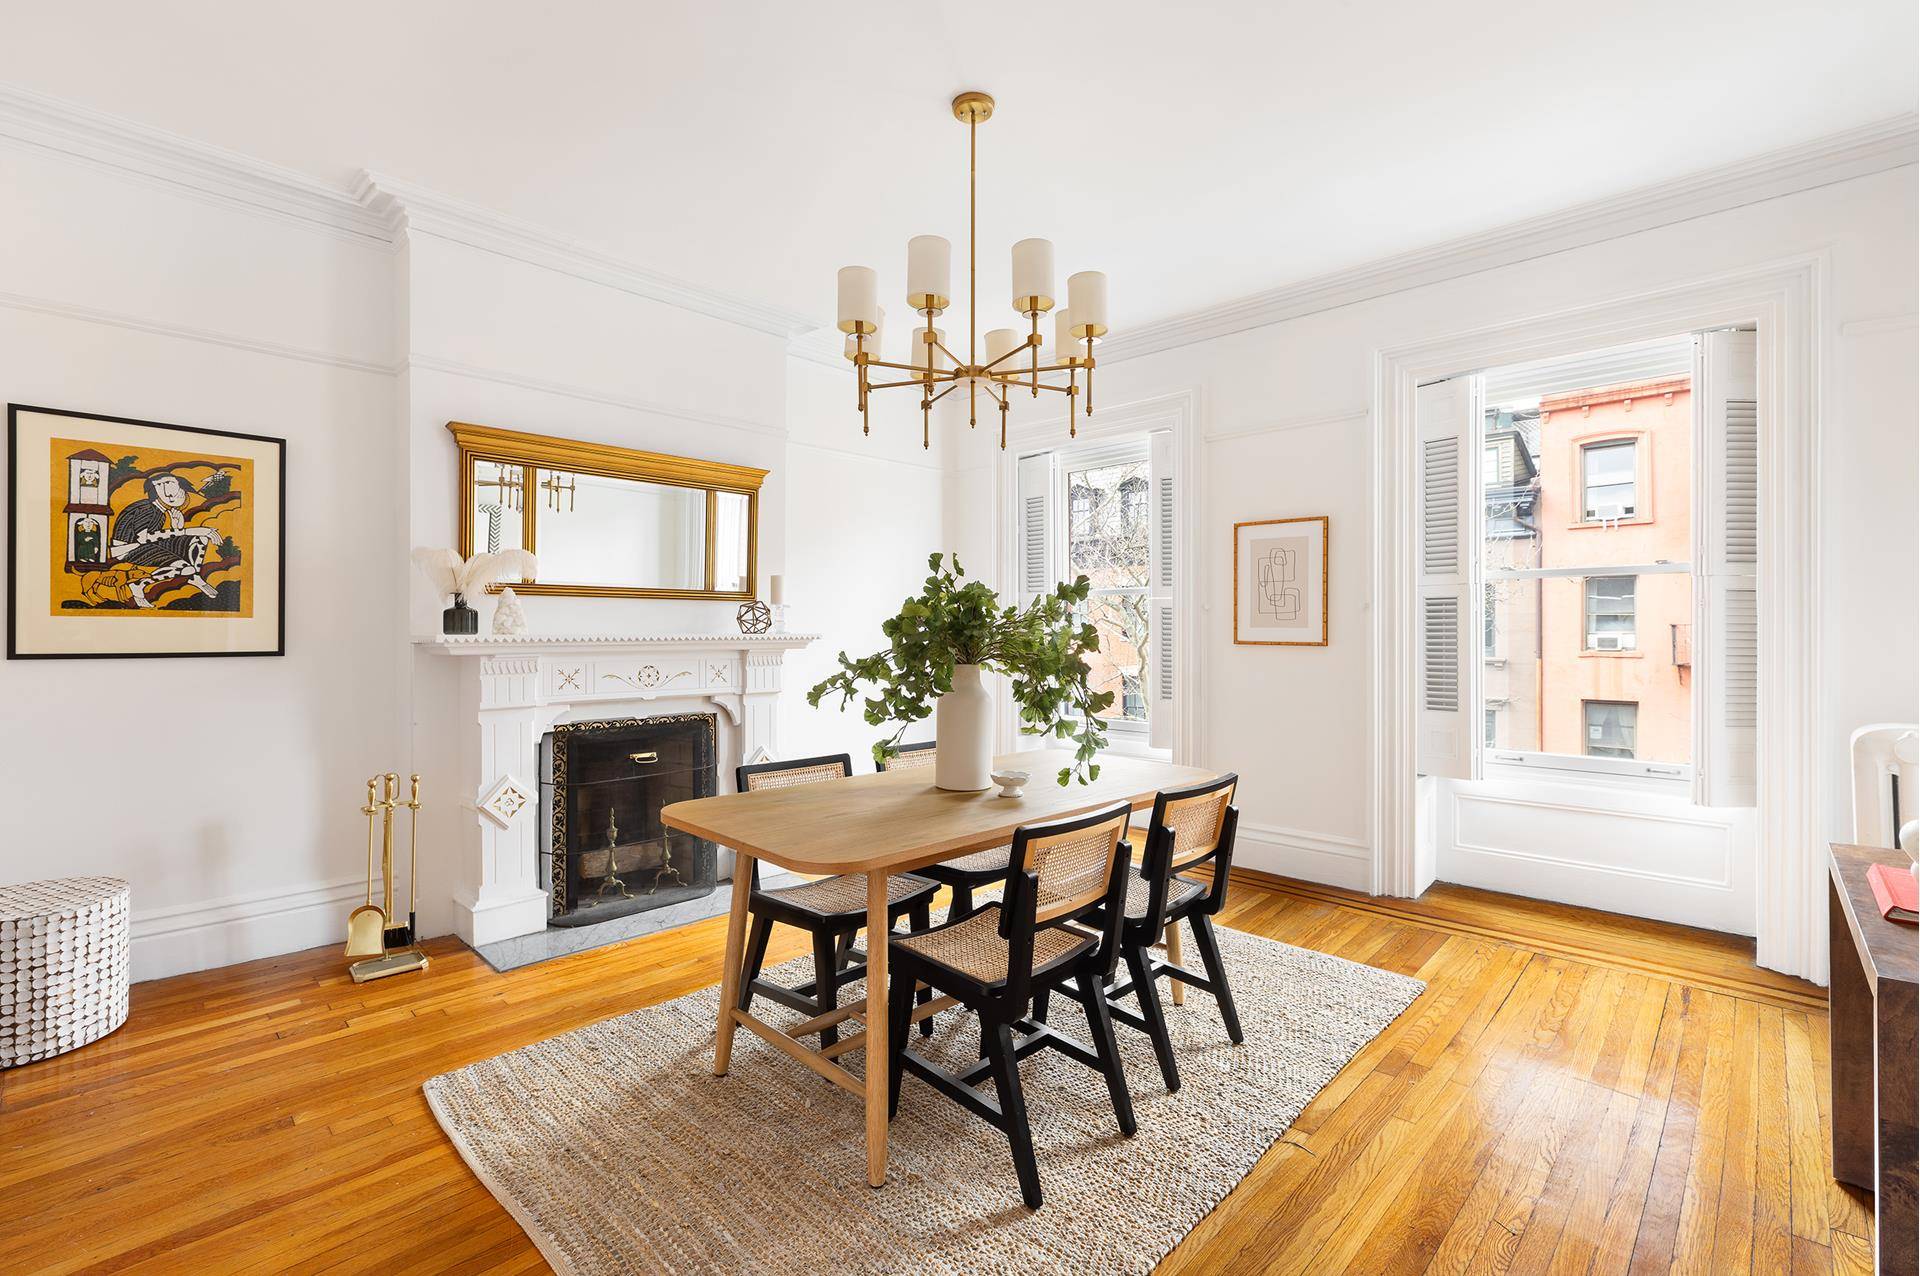 Welcome to this charming coop apartment nestled in the heart of Brooklyn Heights.